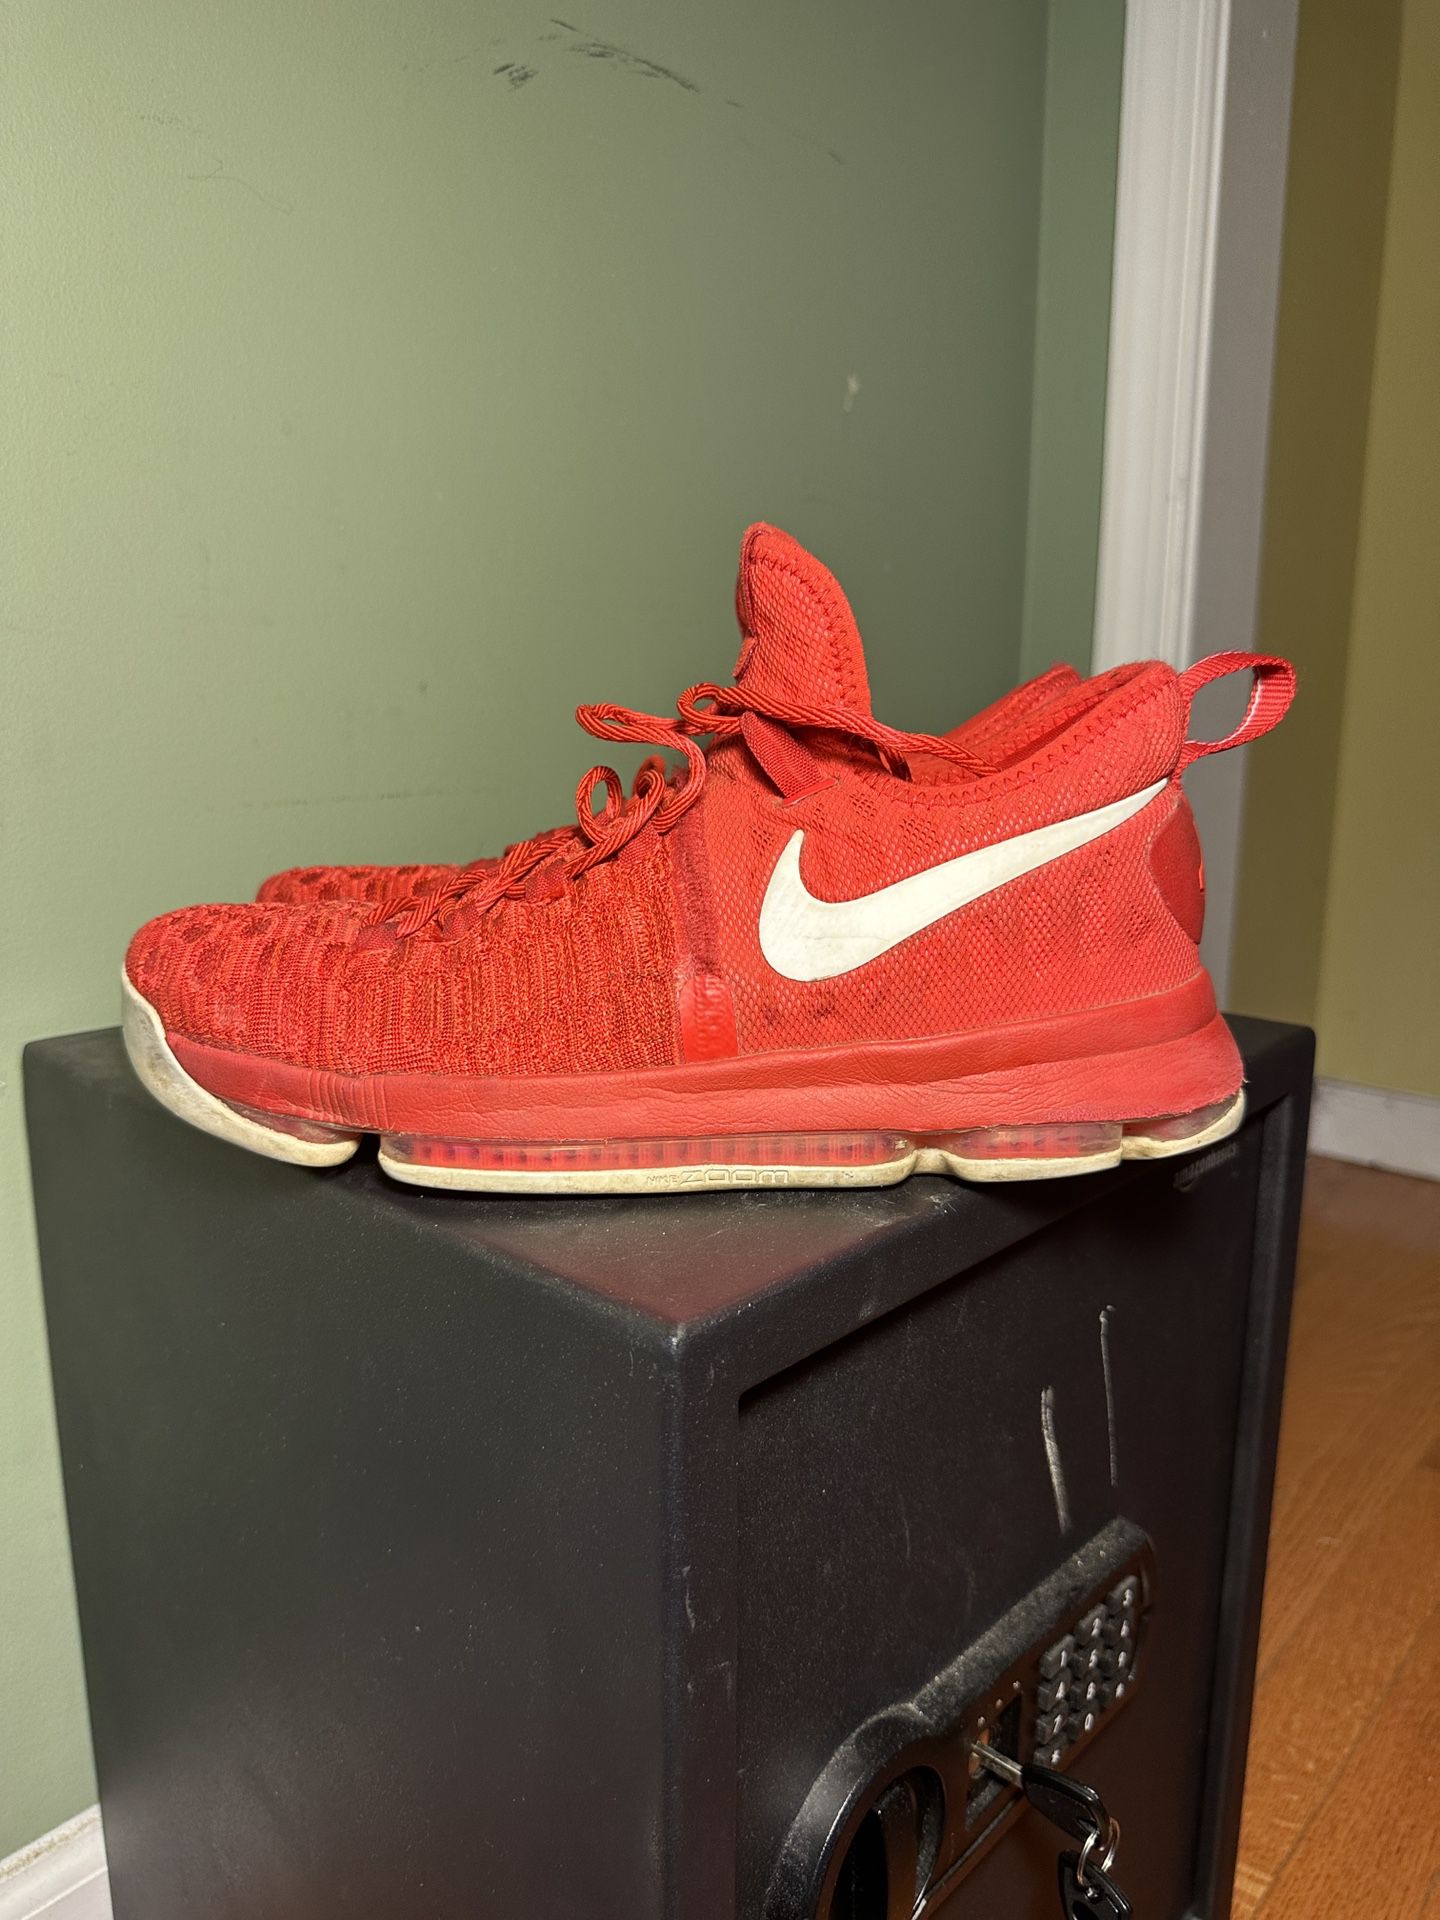 Kevin Durant Shoes, 6th Edition, Sz 11 for Sale in Alexandria, VA - OfferUp